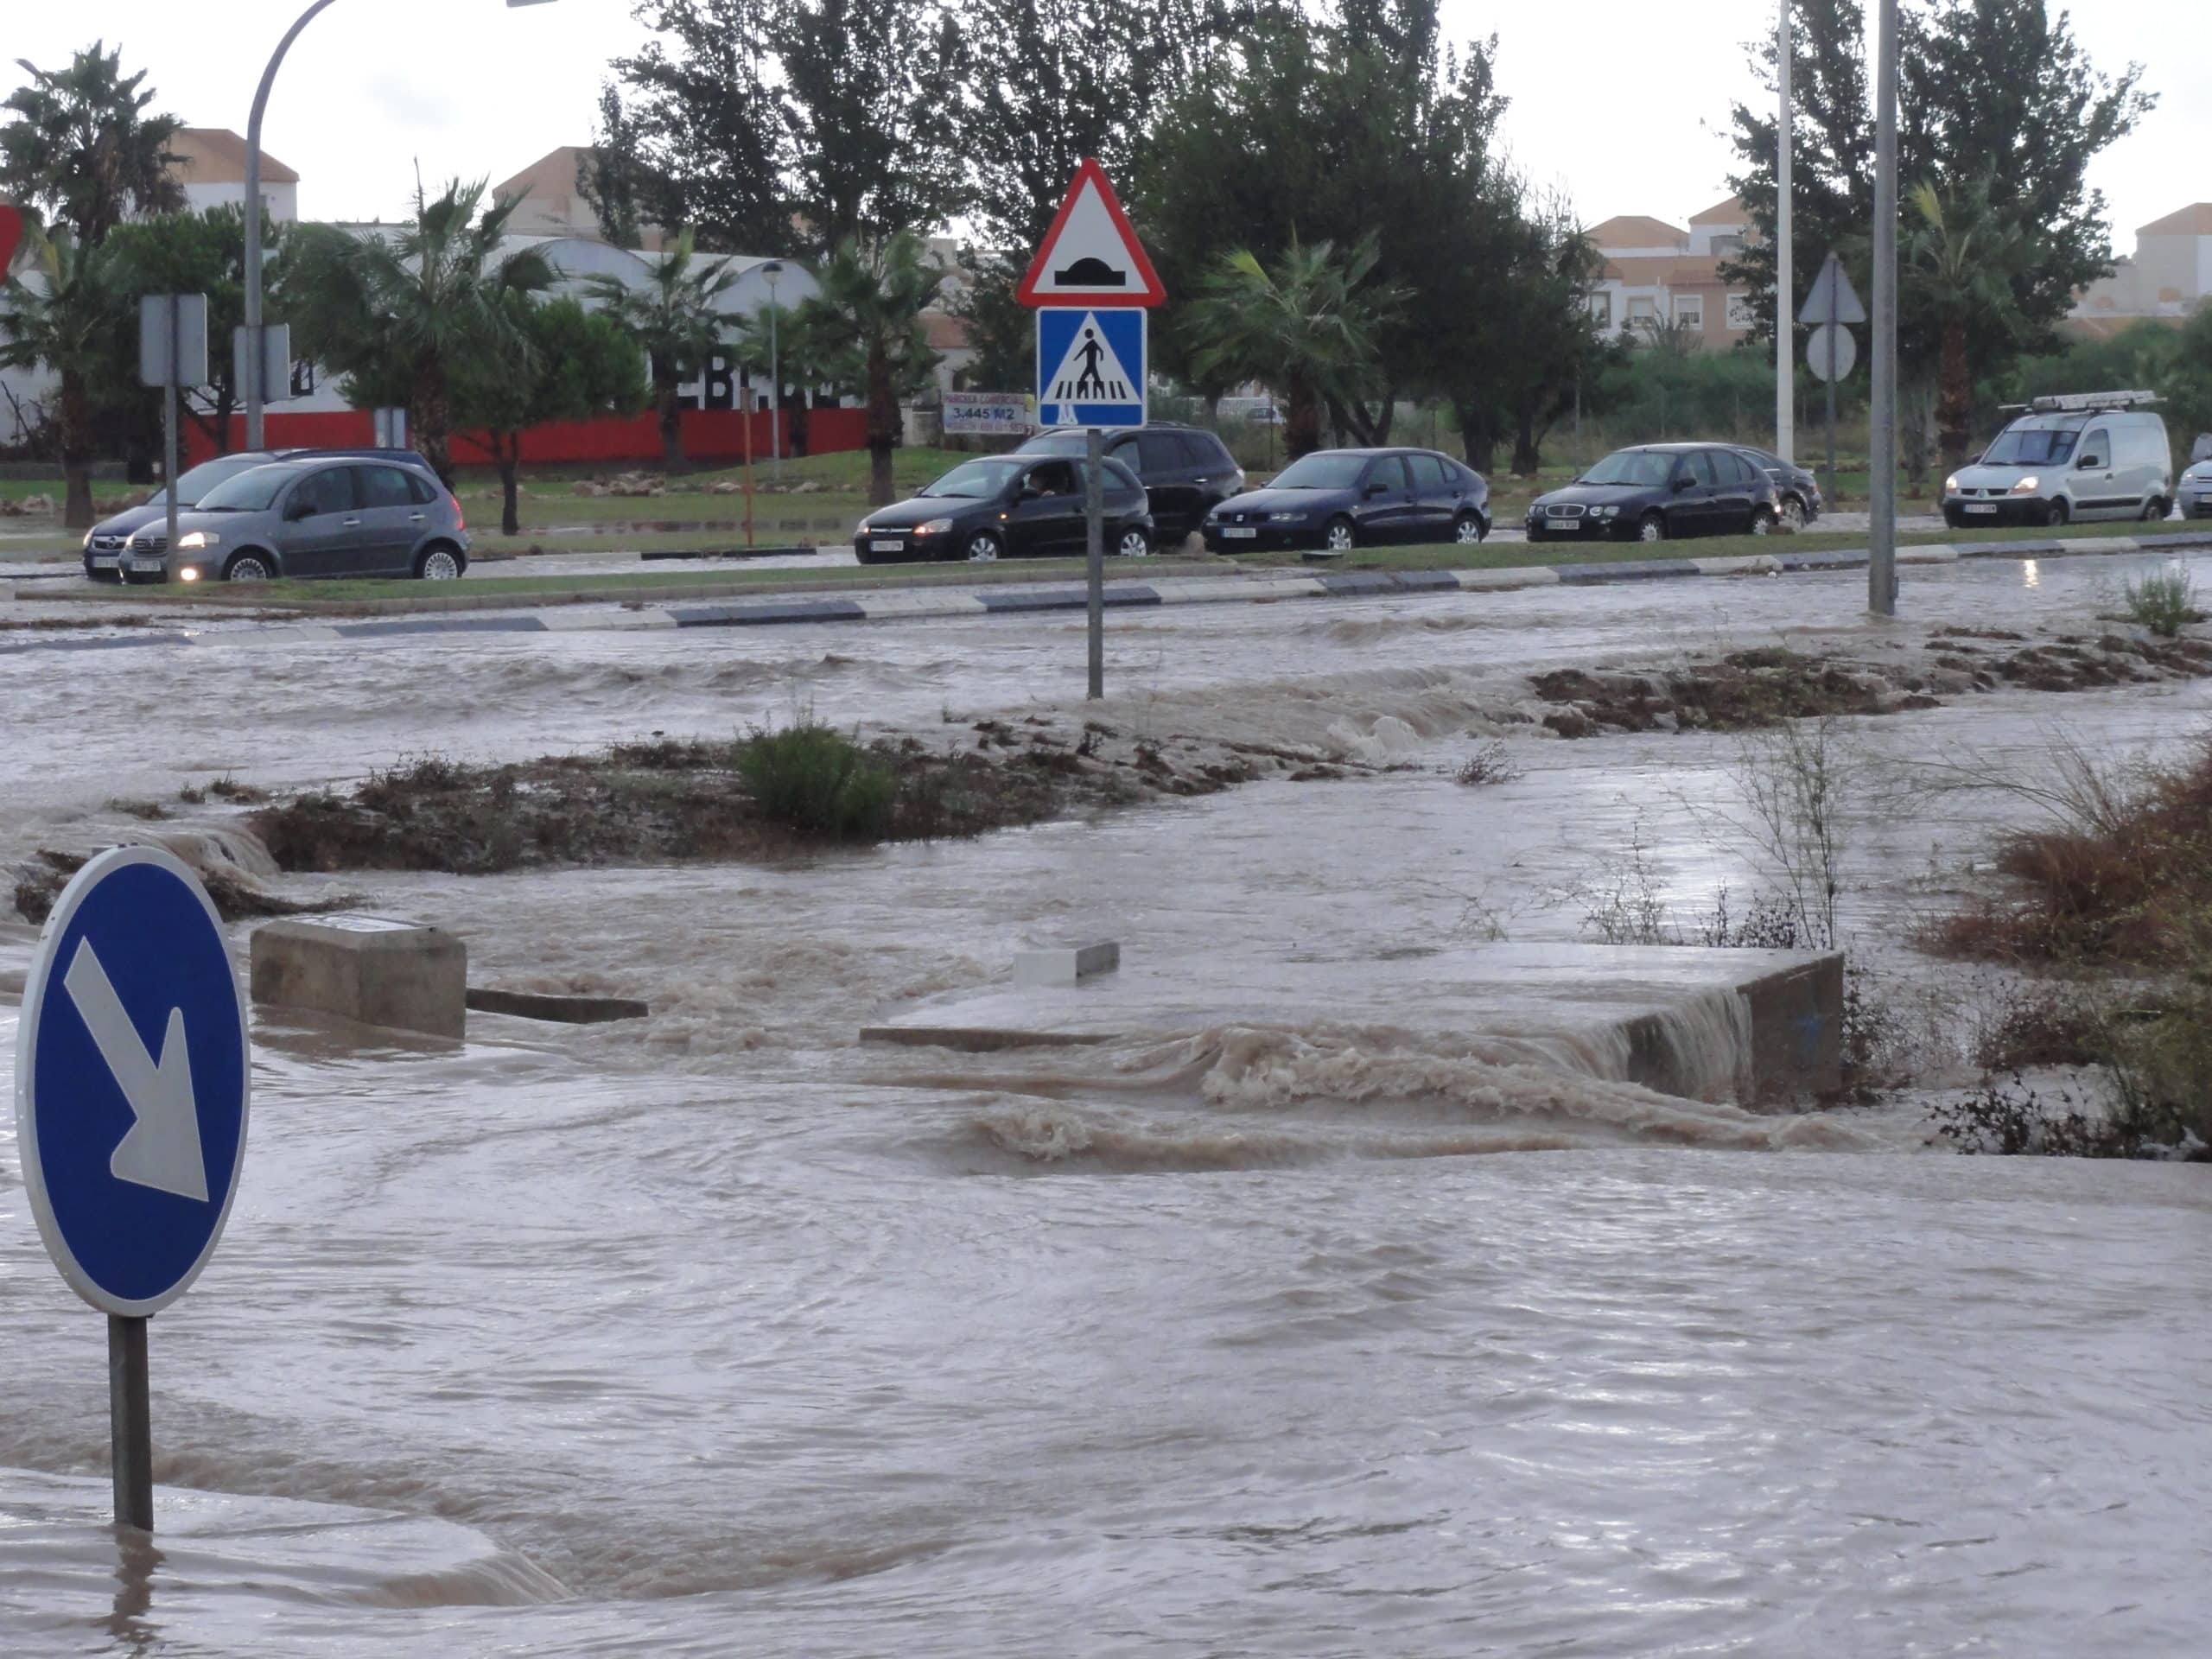 Flooding at the roundabout near the Hiperber supermarket on the border of Lagoons Village, Torrevieja